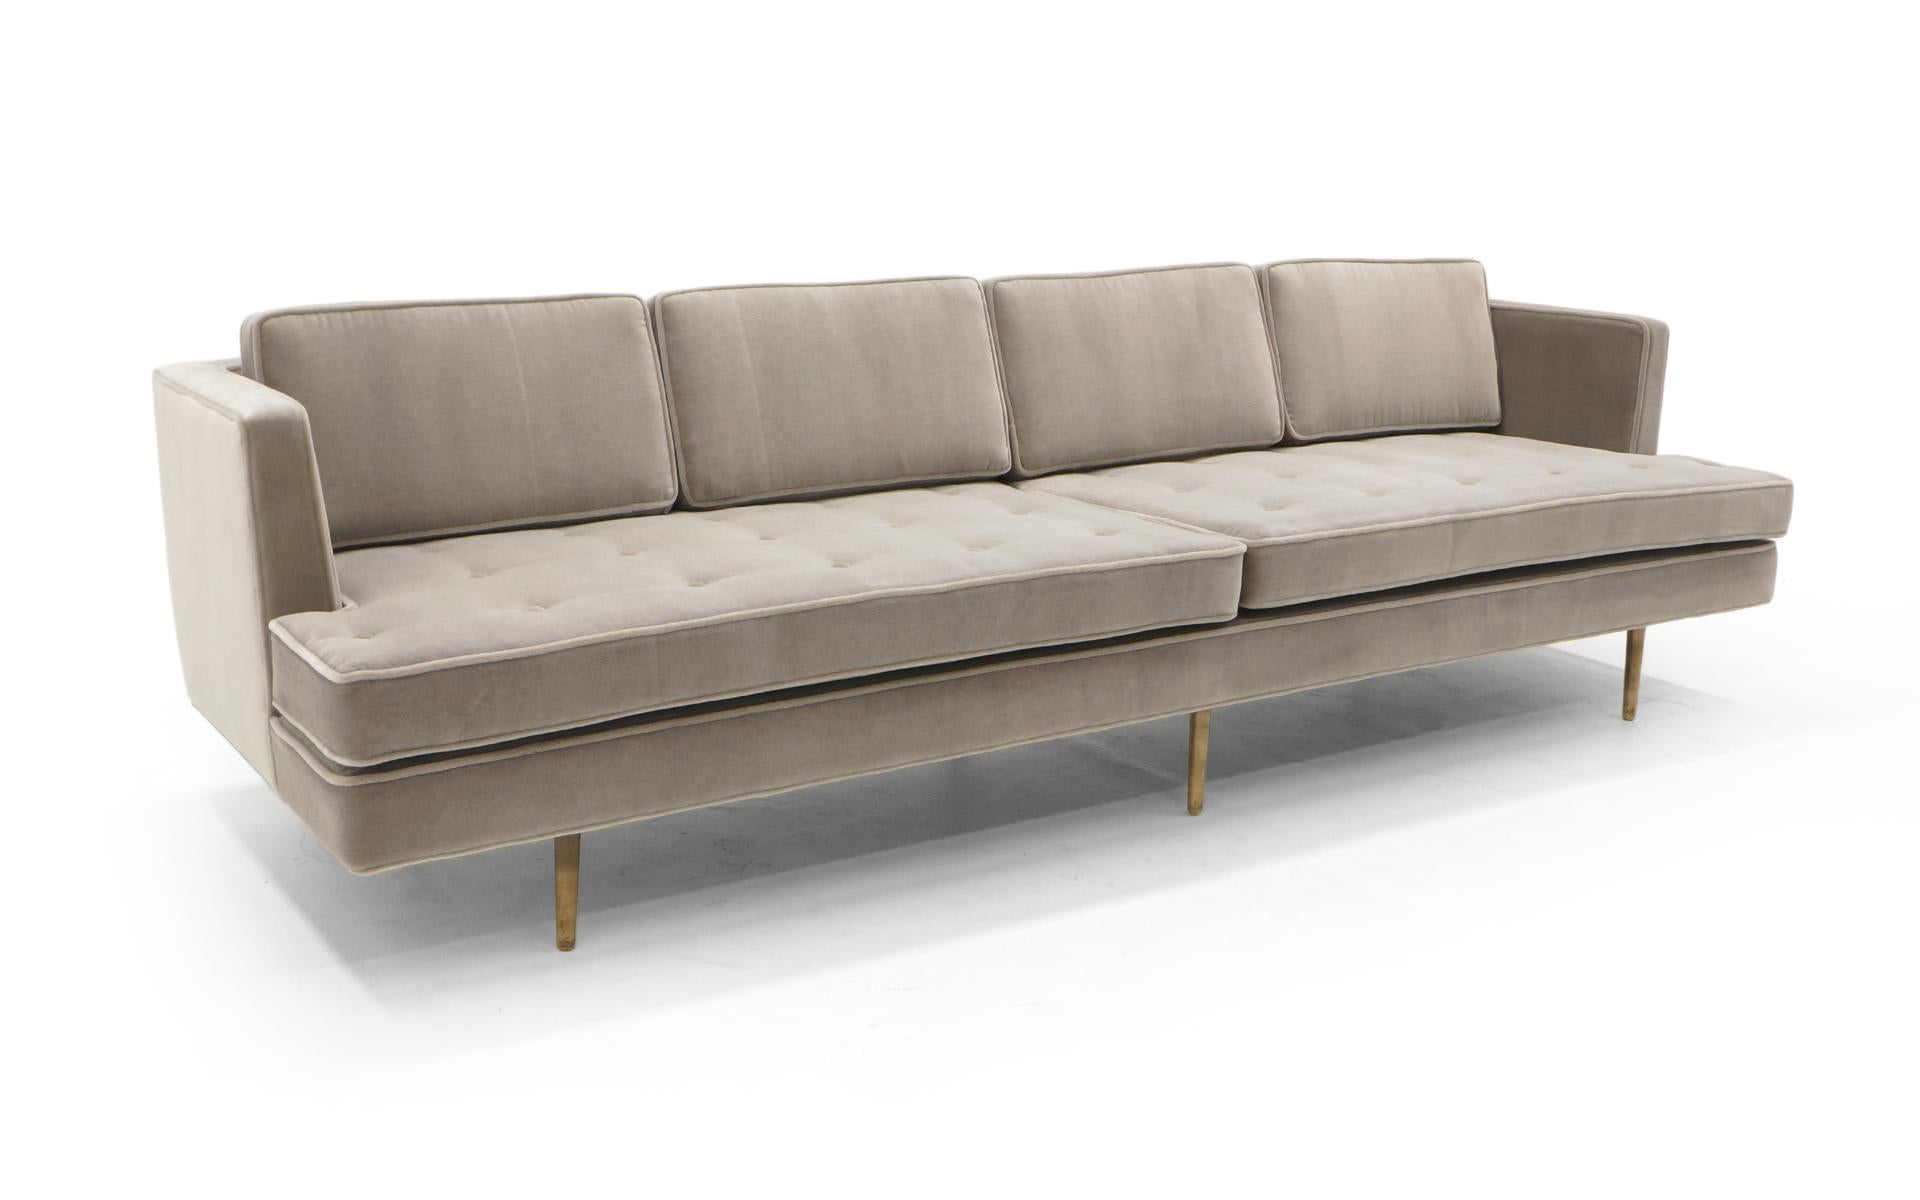 Stunning Edward Wormley for Dunbar sofa. Nine feet Long with Solid Brass Legs (These legs can be polished to a beautiful luster if you prefer). The sofa has been expertly restored and reupholstered in Lee Jofa Marlow Mohair, Pearl, with a retail